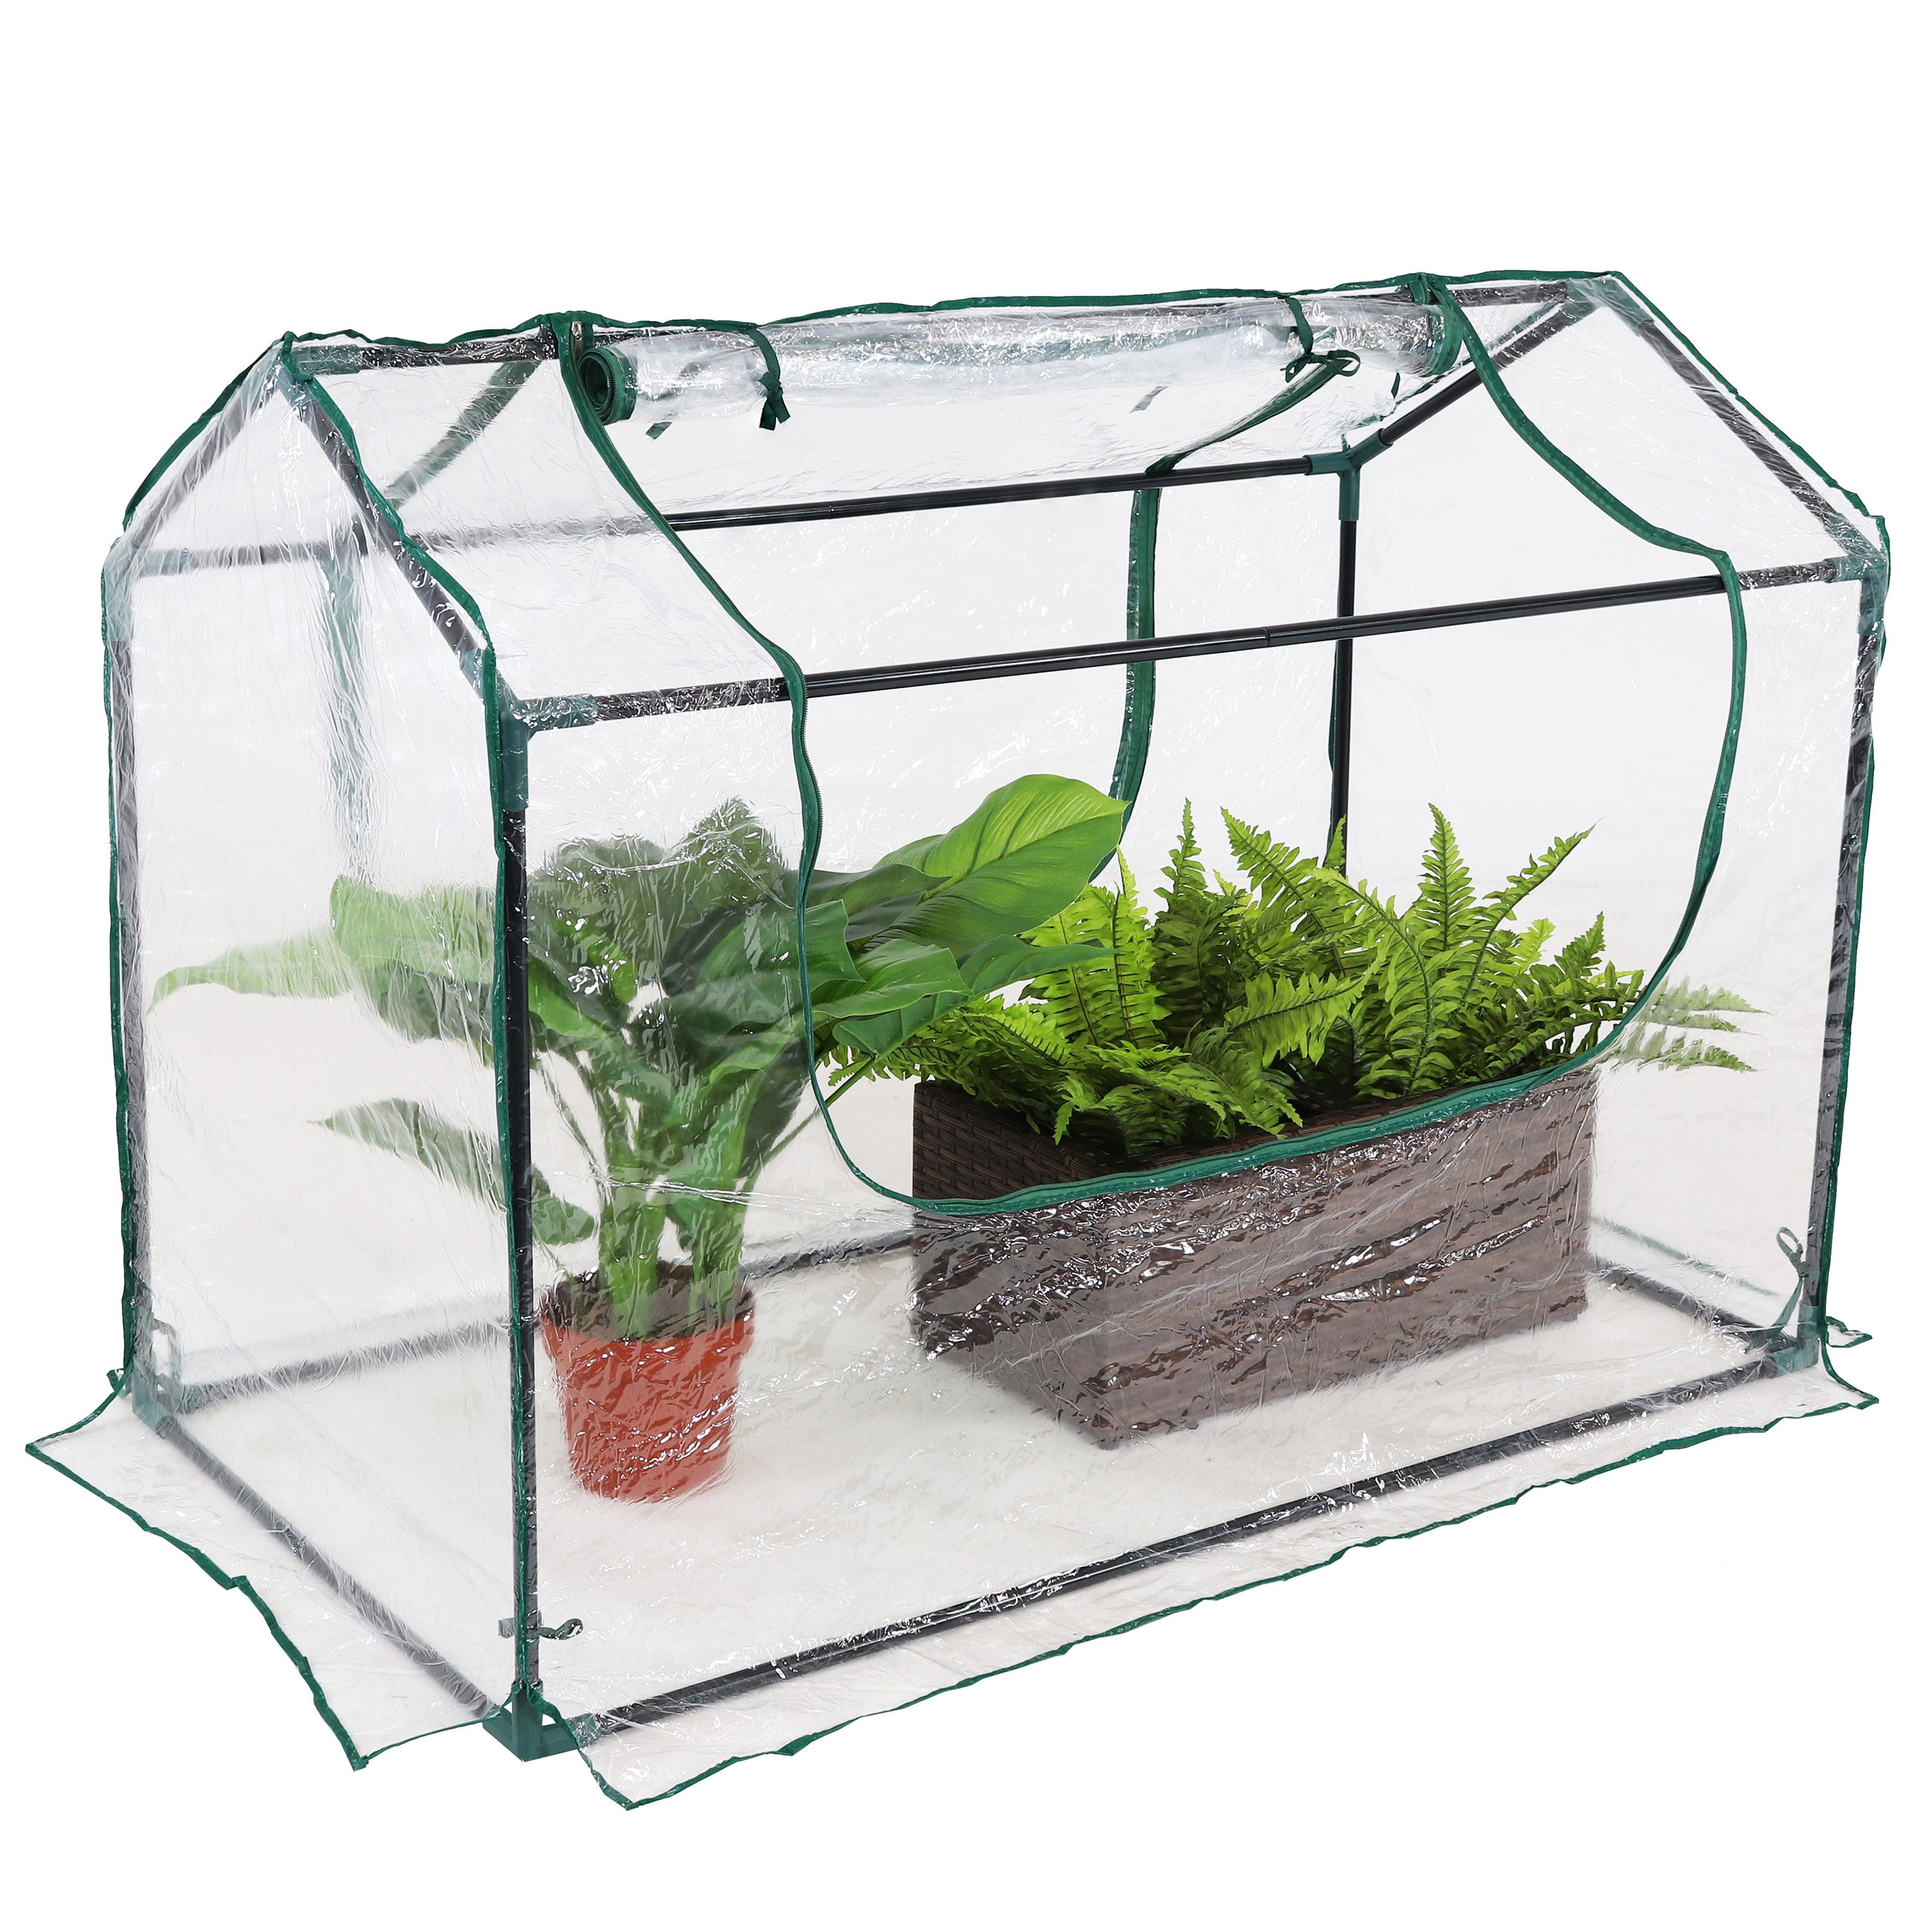 Details about   Rectangular Greenhouse Planter Box w/ Polycarbonate Panels to Keep Plants Warm 